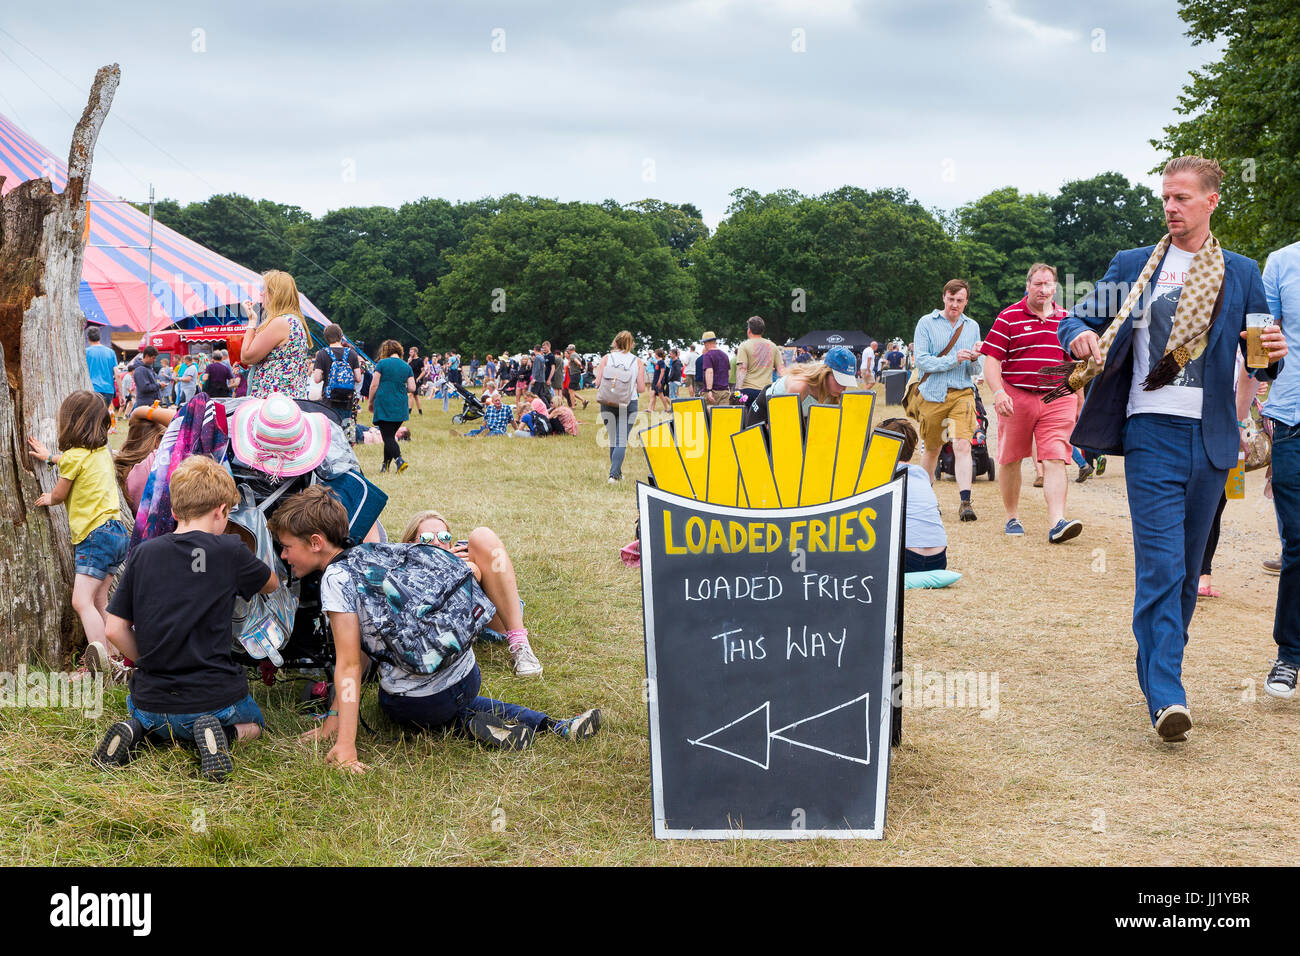 Loaded fries sign, with man in suit and scarf with beer looking suspiciously at children investigating backpack on buggy. Latitude Festival, Suffolk Stock Photo